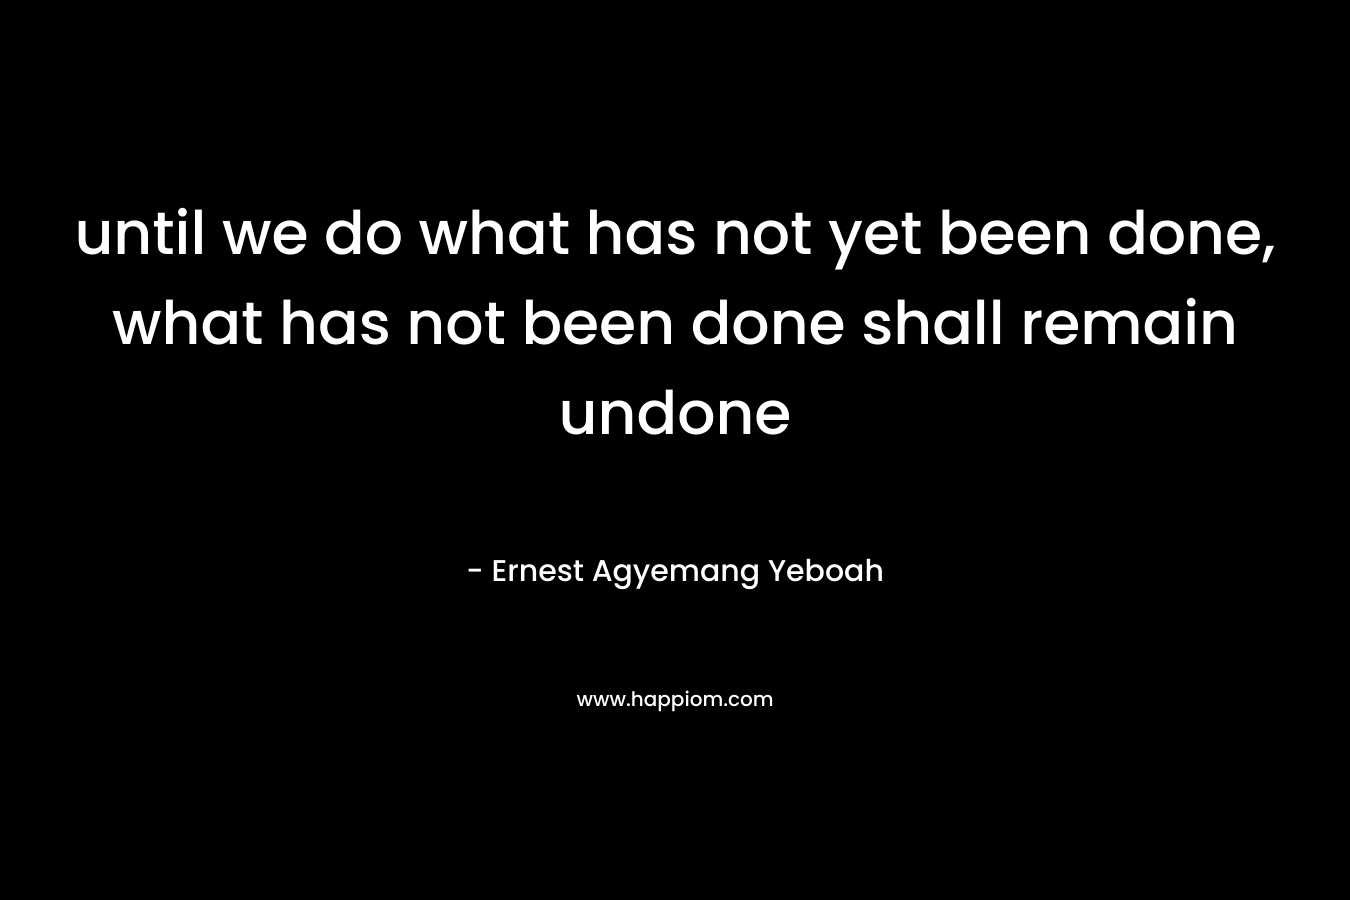 until we do what has not yet been done, what has not been done shall remain undone